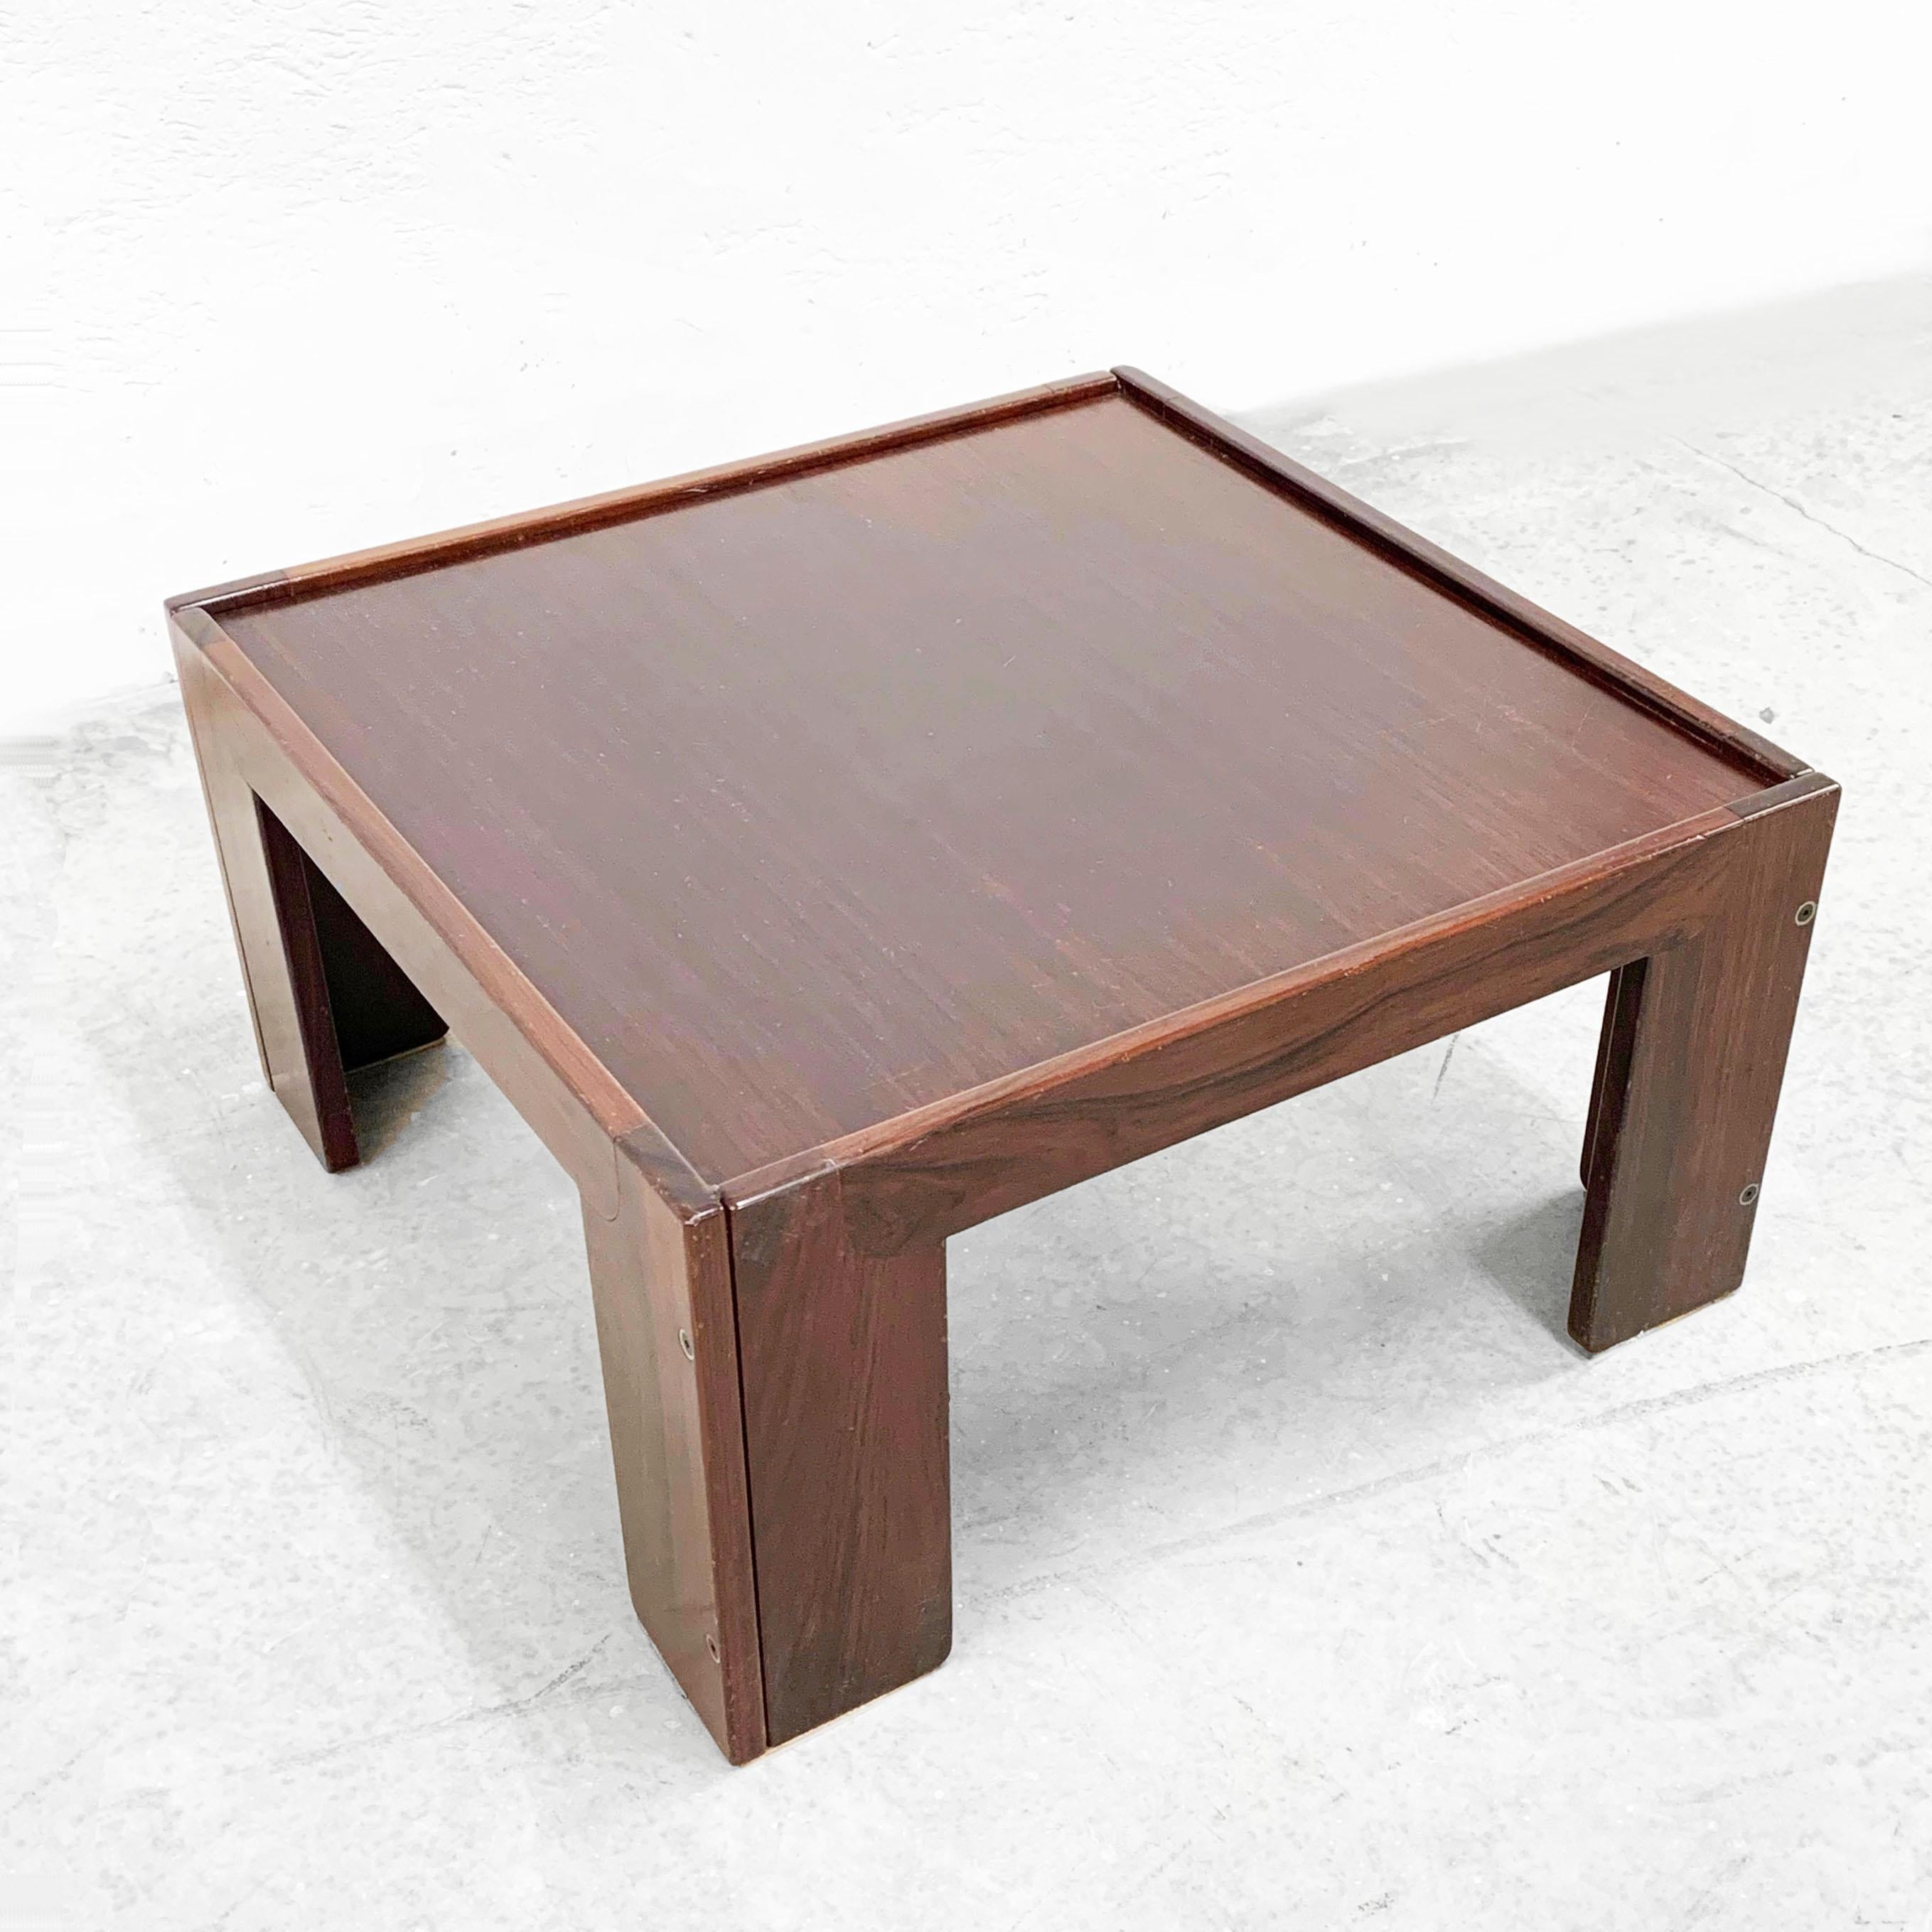 Wood Afra and Tobia Scarpa, Square Table, for Cassina, Italy, 1970s